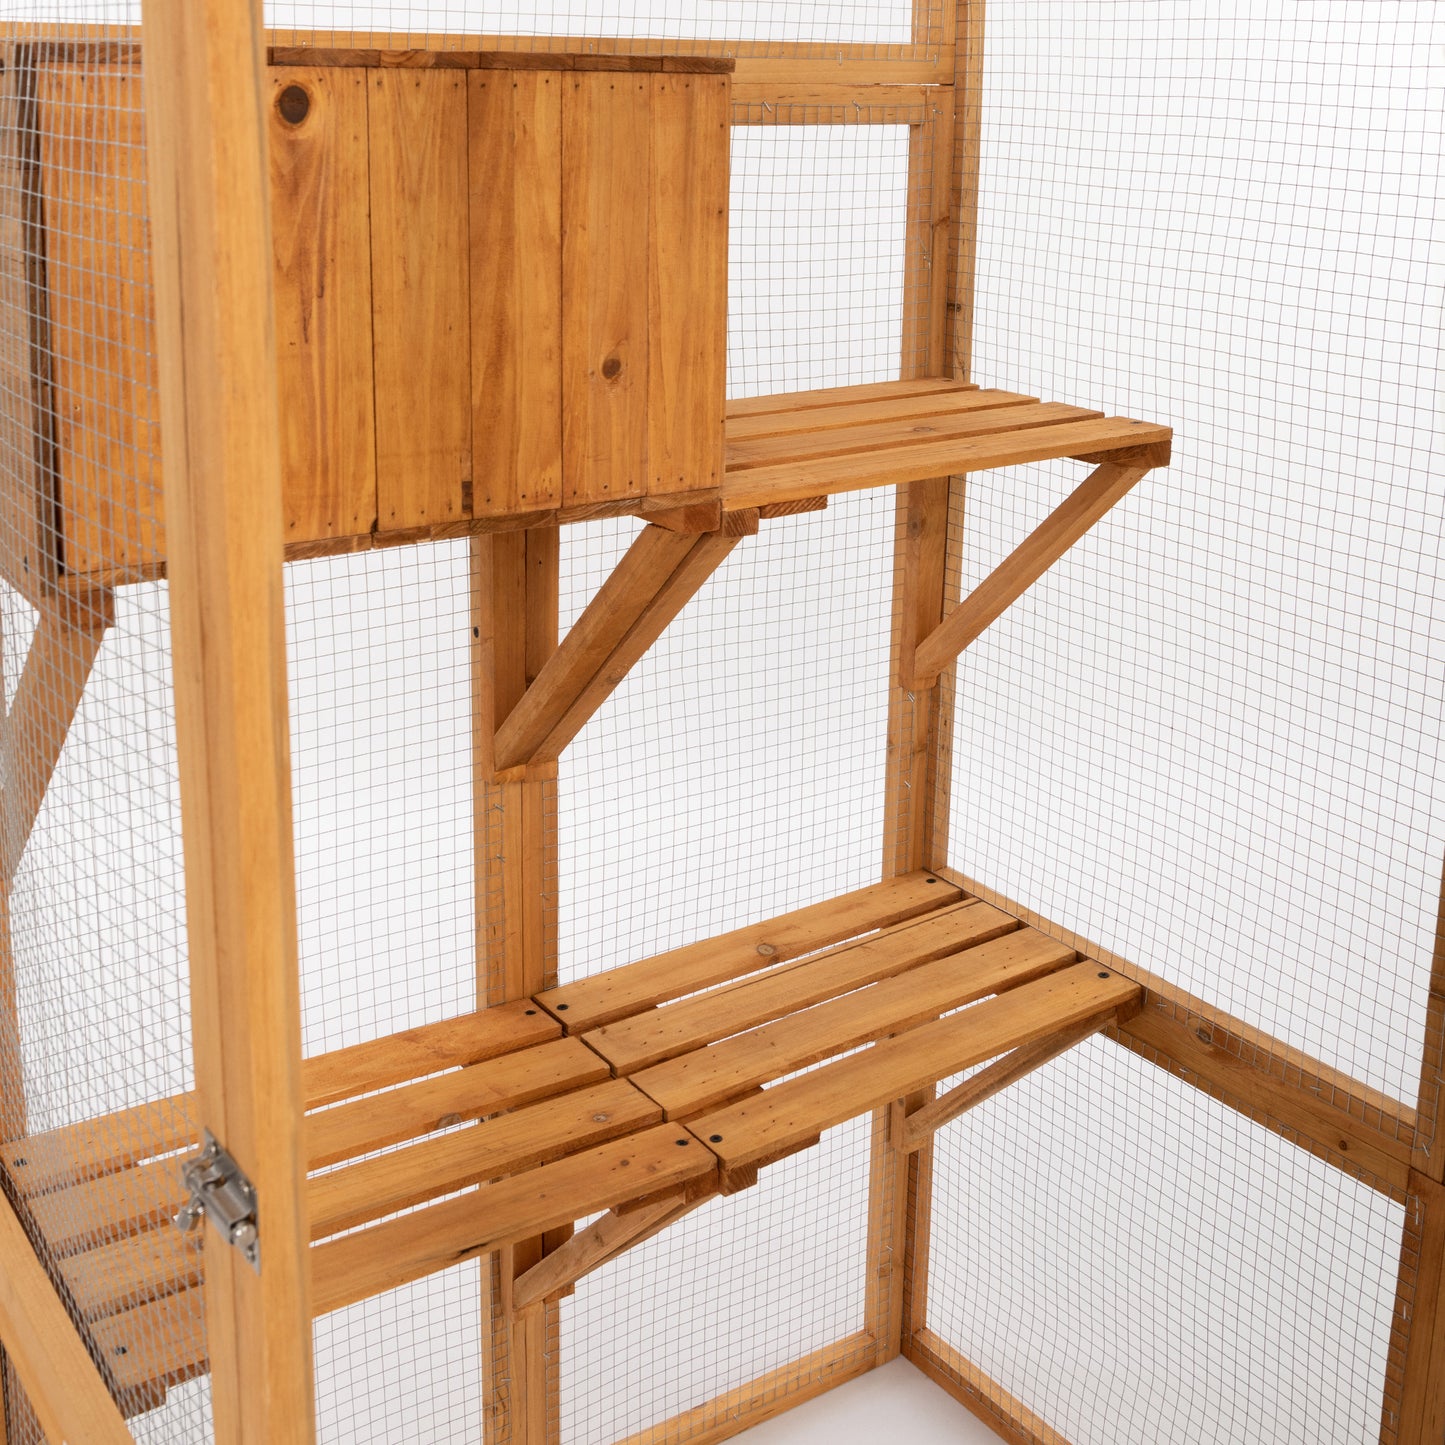 Outdoor Cat Enclosure, Large Wood Cat Cage with Sunlight Top Panel, Perches, Sleeping Boxes, Pet Playpen, Orange